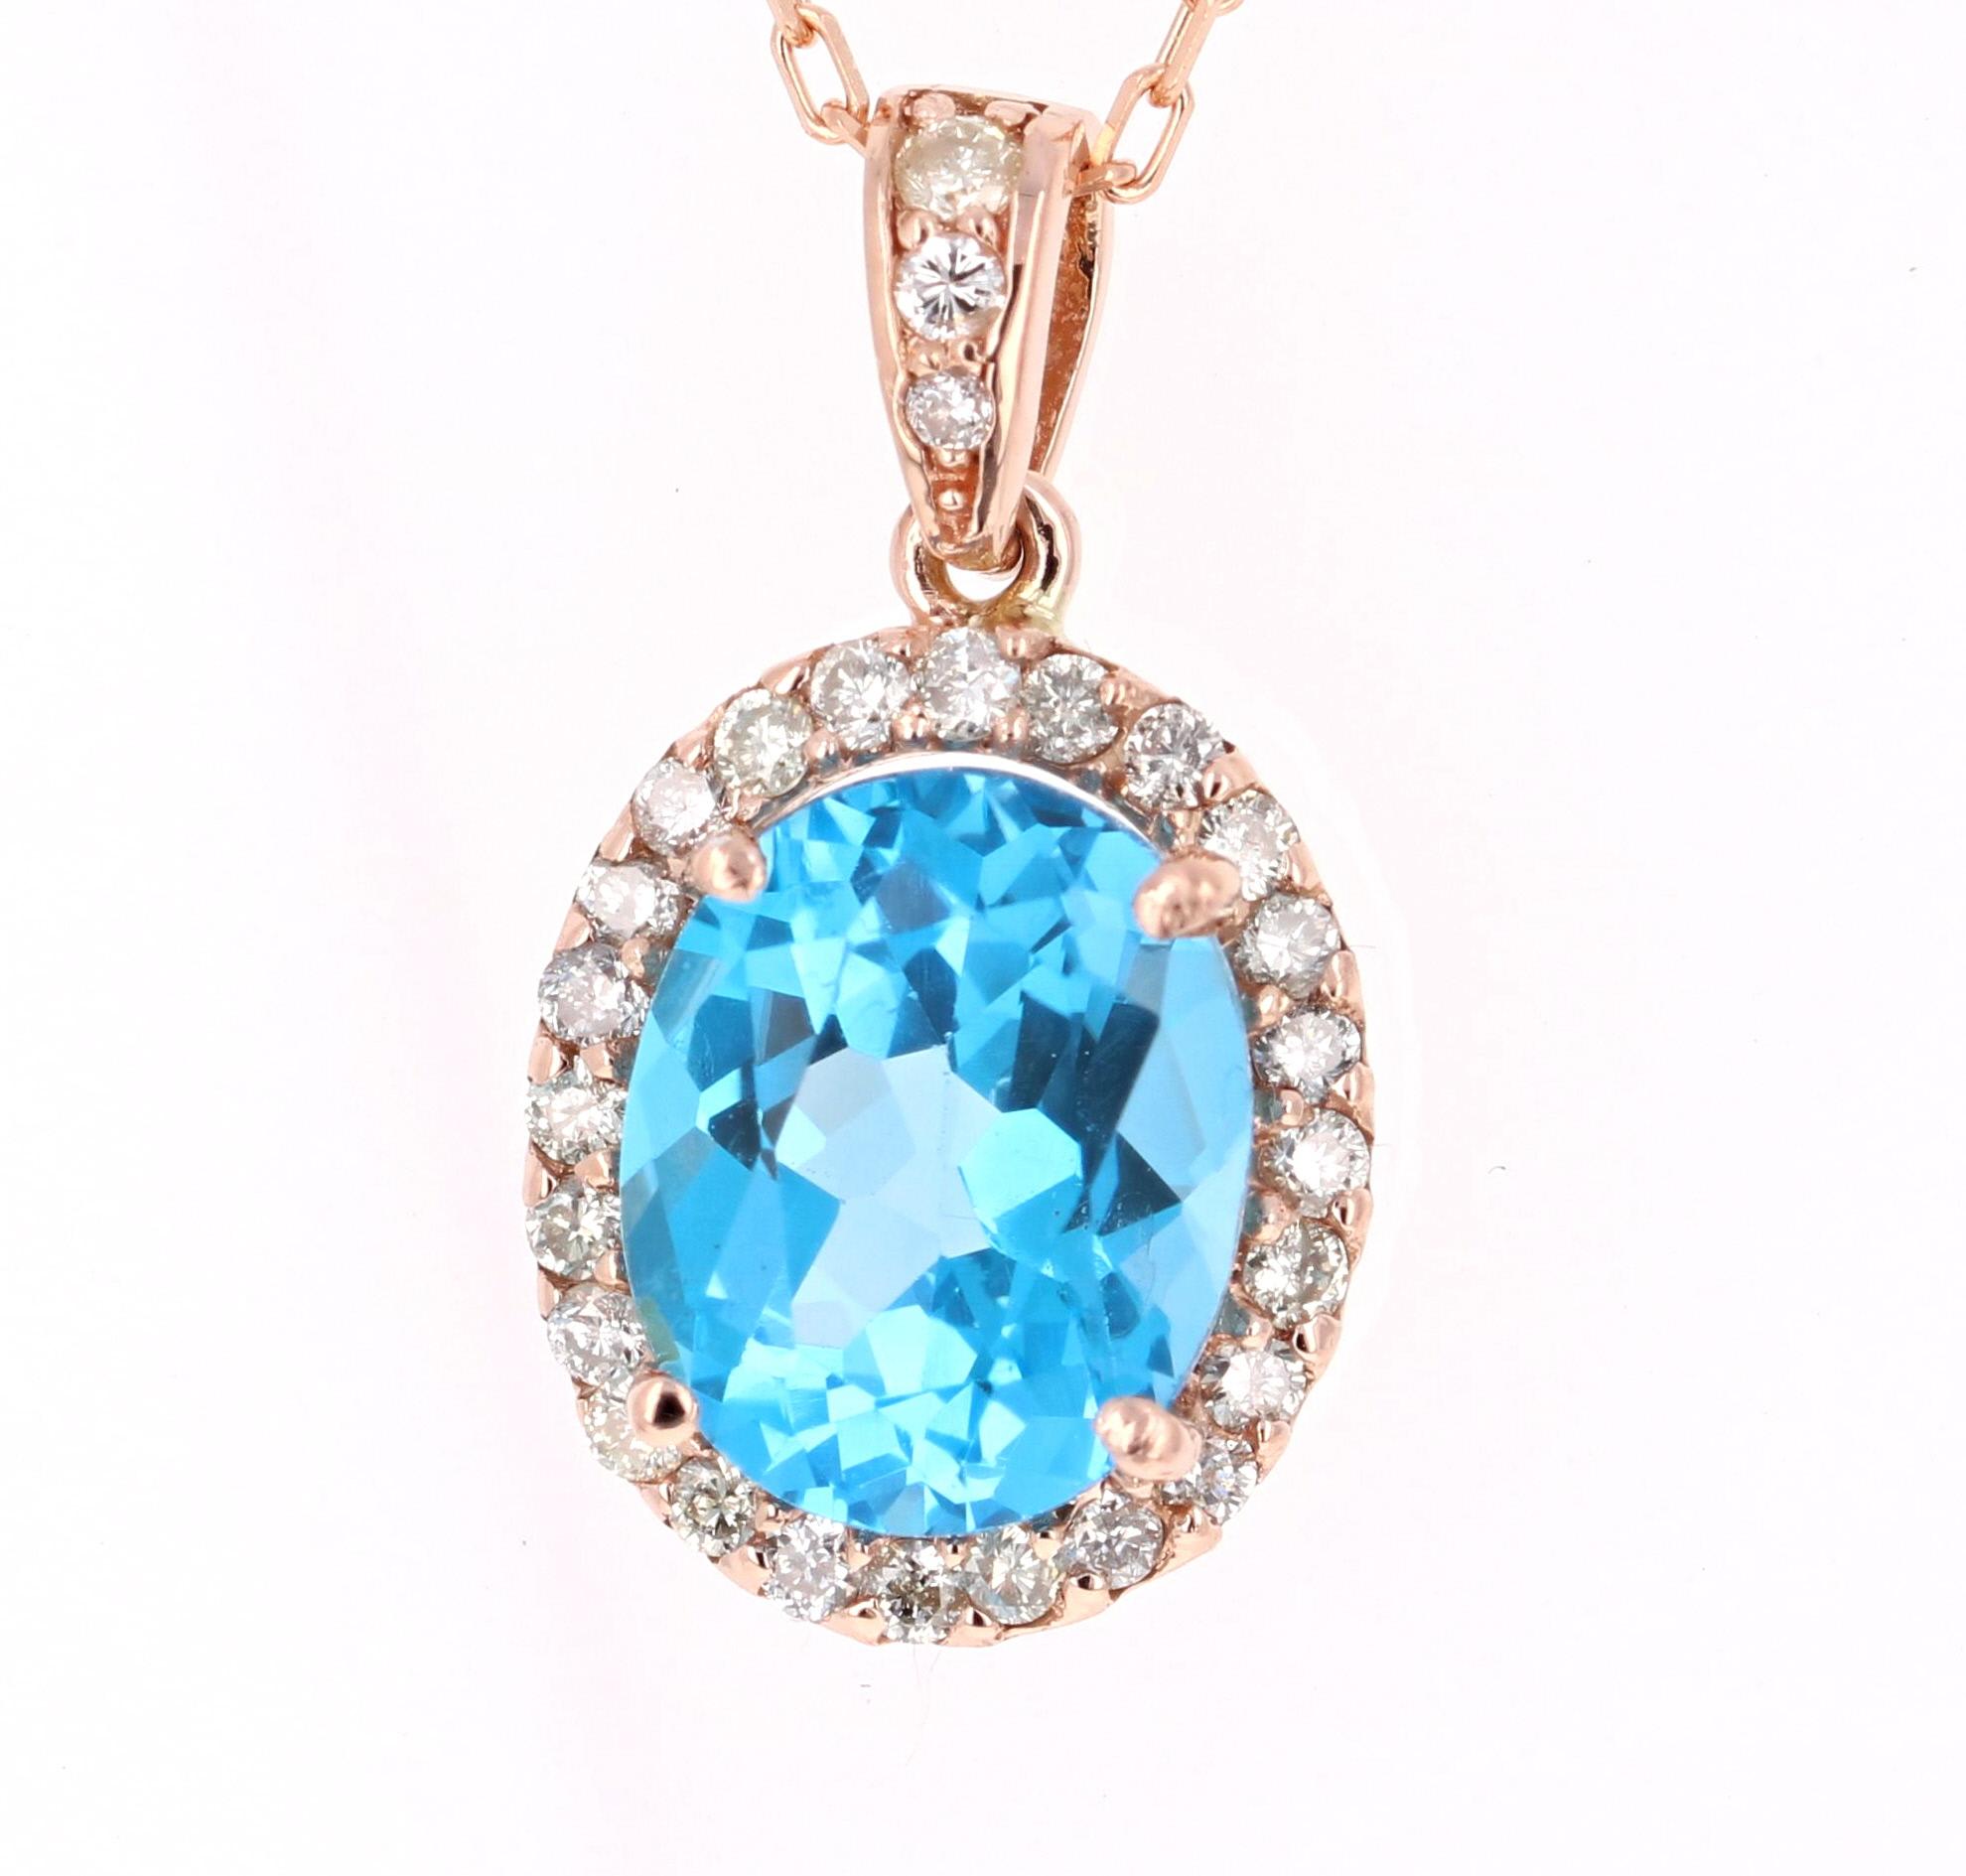 Super cute and classic Pendant made with pretty hues of Blue Topaz and Diamonds.   
4.94 Carat Blue Topaz and Diamond 14 Karat Rose Gold Chain Pendant!

There is an Oval Cut Blue Topaz in the Pendant that weighs 4.49 Carats and is surrounded by 27